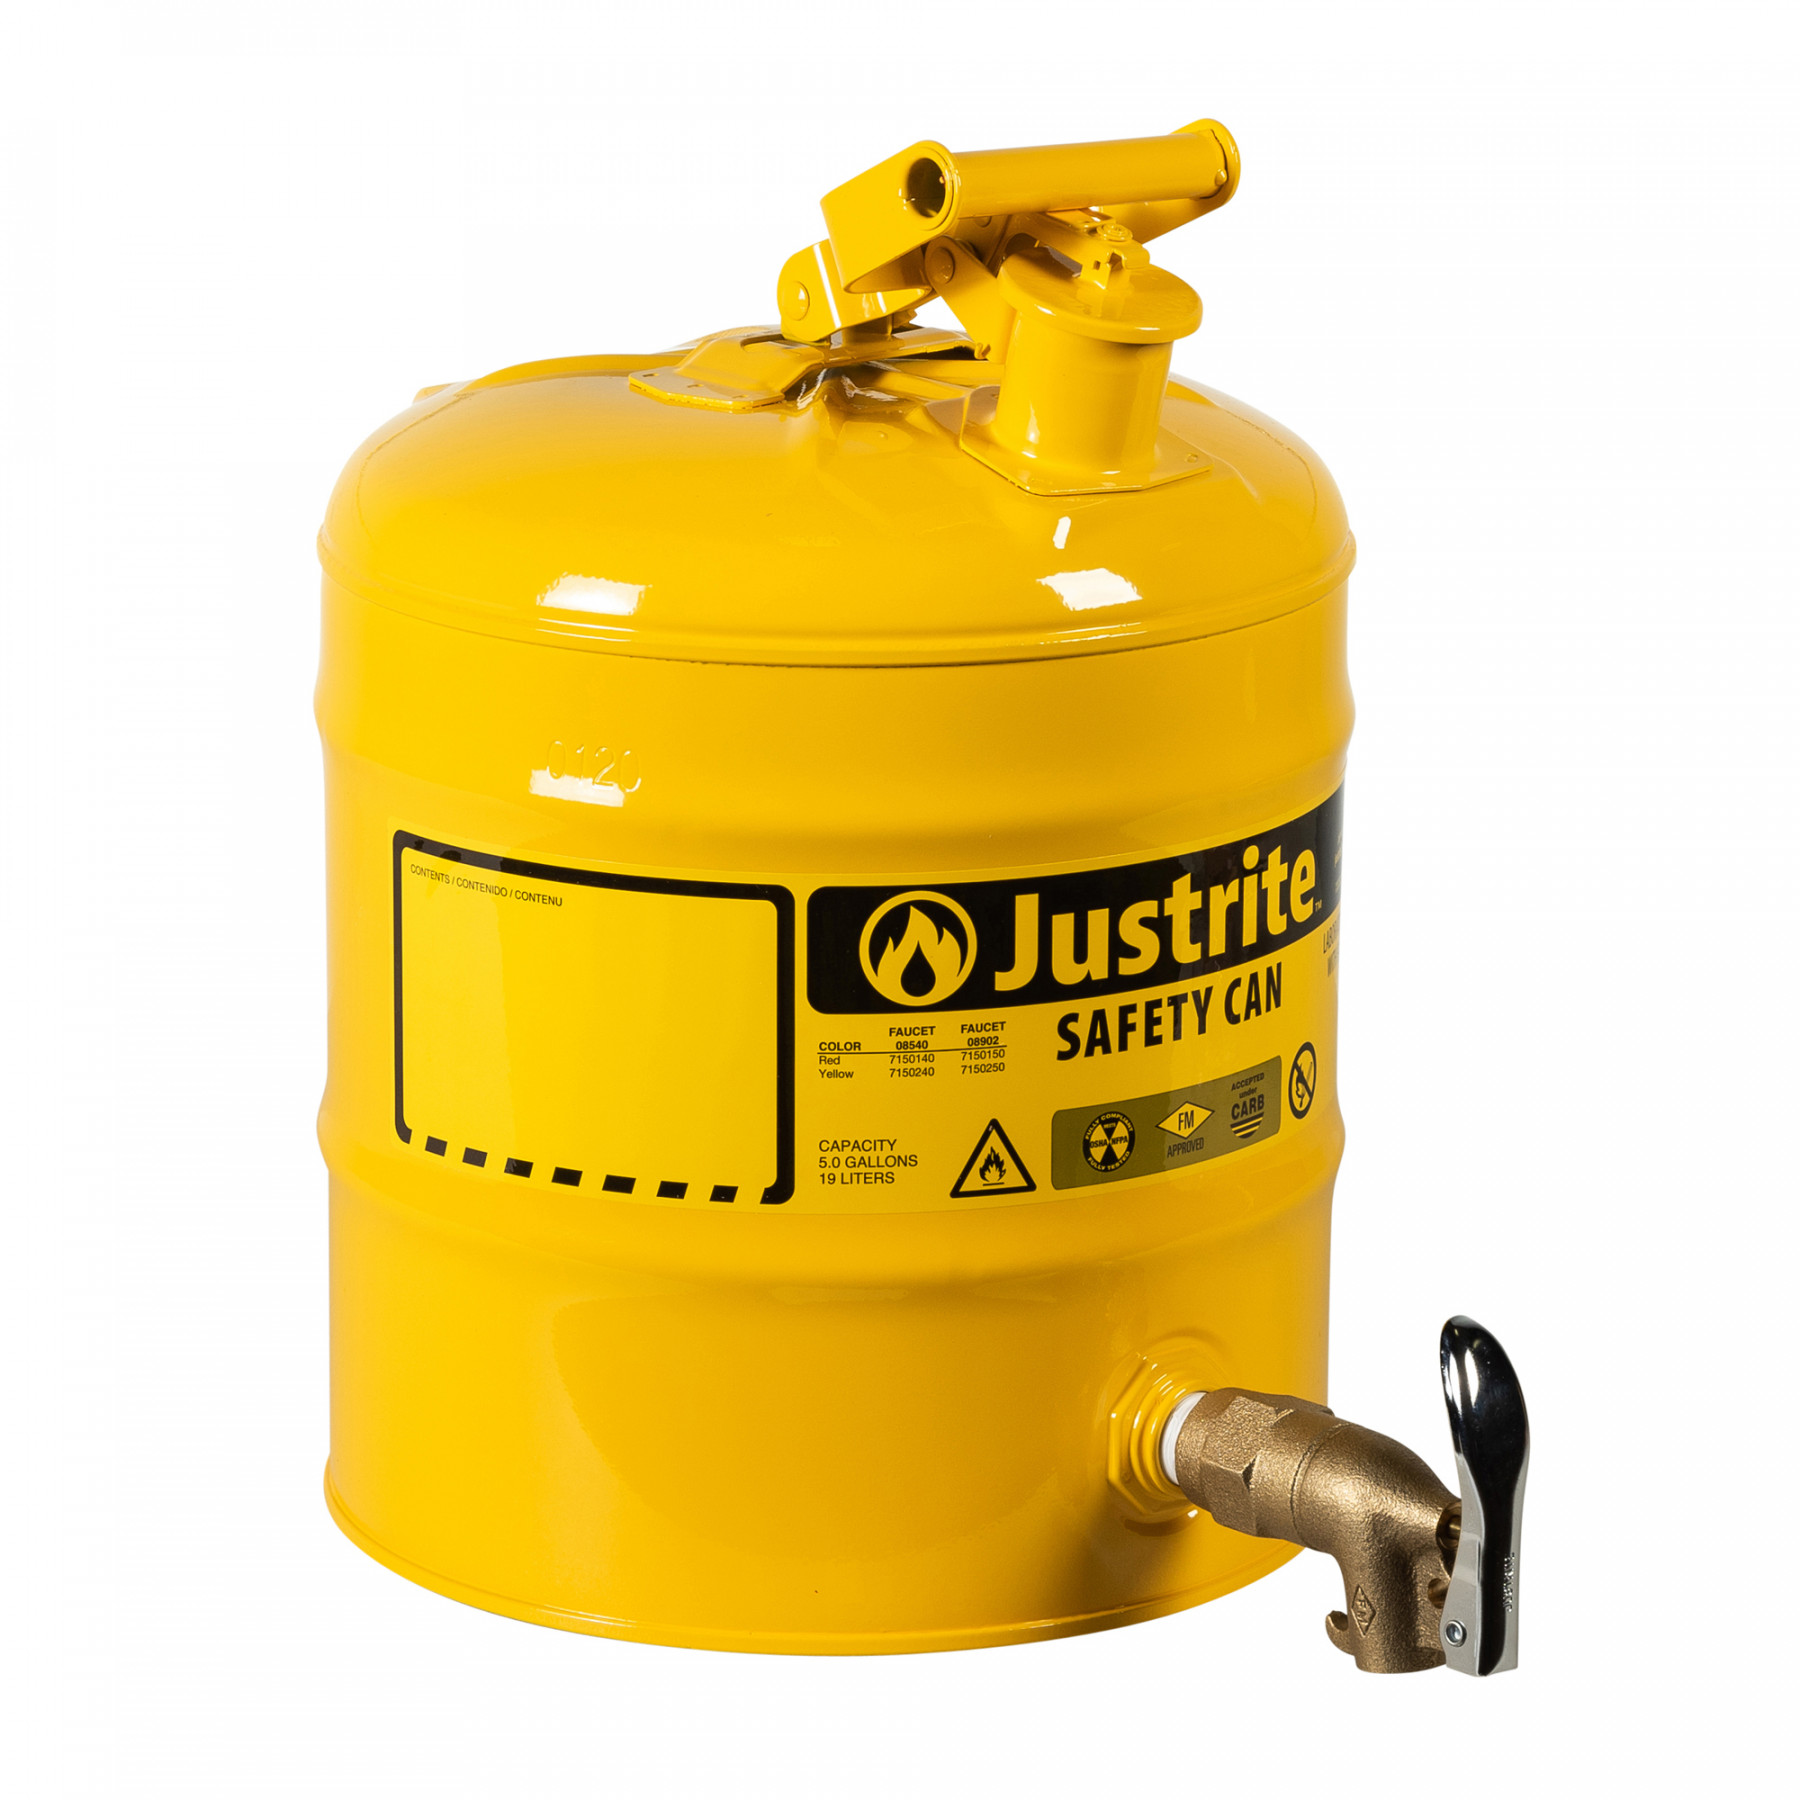 7150250_type-1-safety-can-5-gallon-yellow_justrite_1